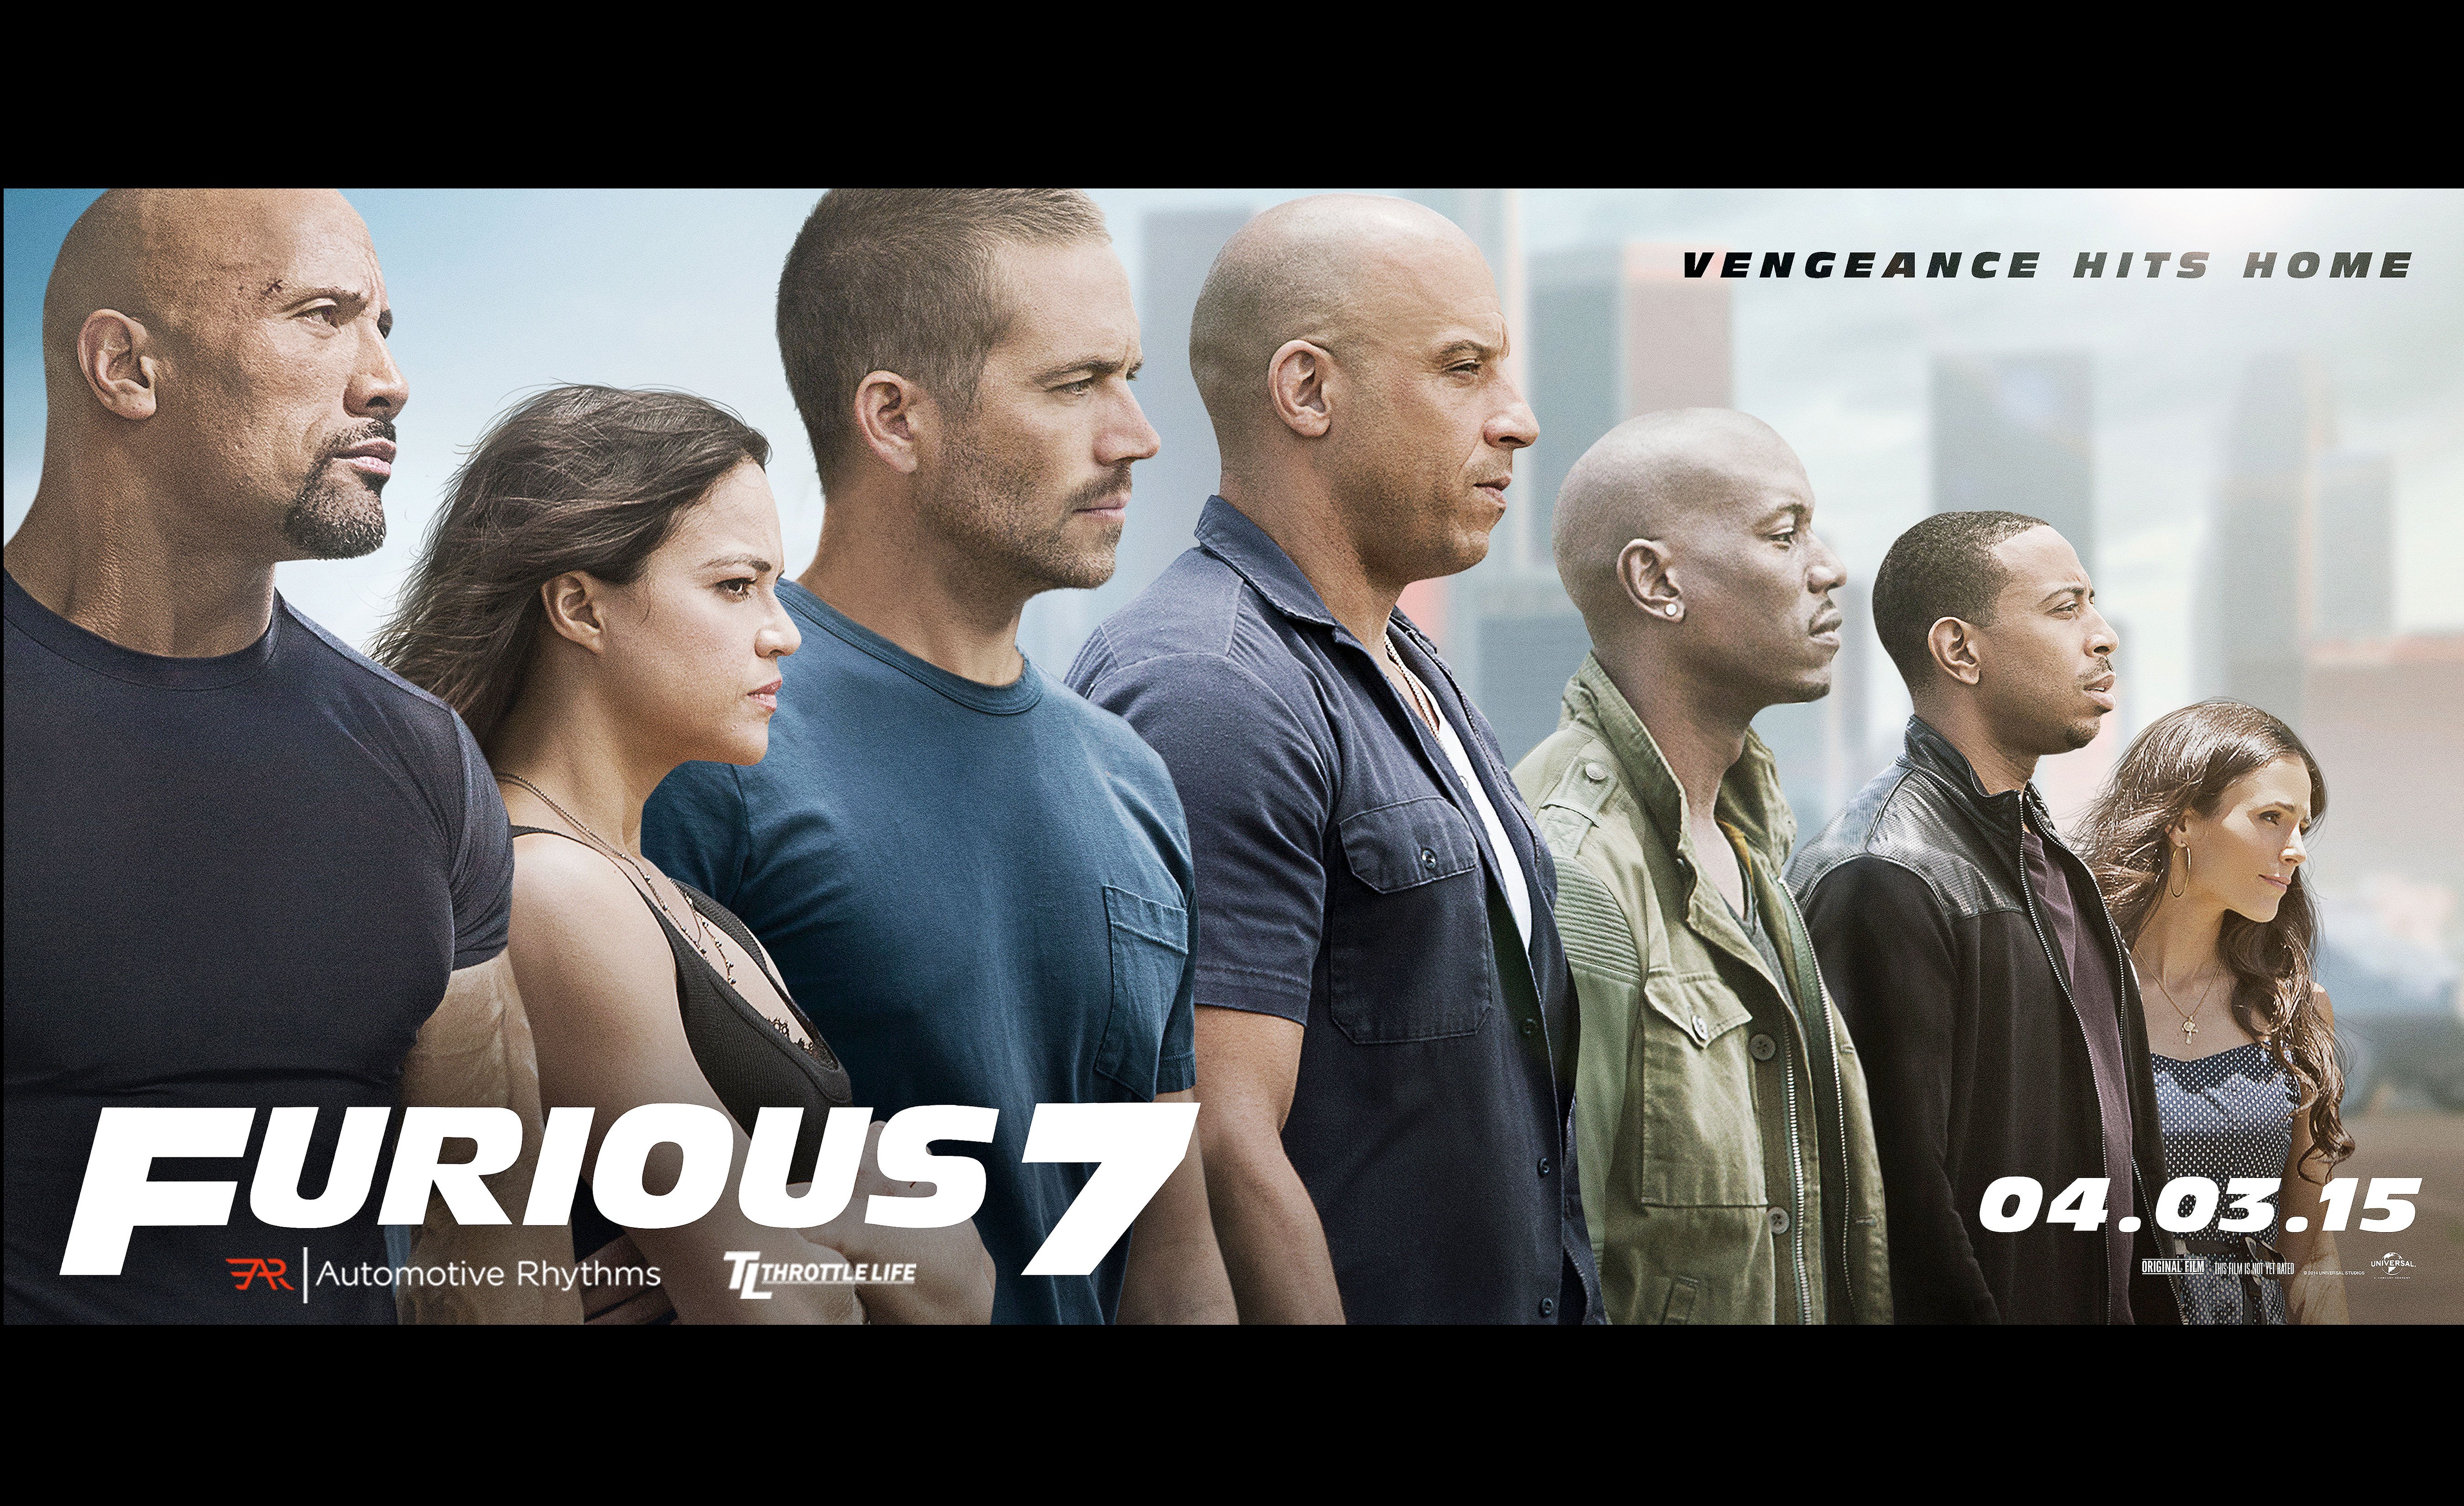 fast furious 7 action thriller race racing crime ff7 1ff7 poster wallpapers hd desktop and mobile backgrounds fast furious 7 action thriller race racing crime ff7 1ff7 poster wallpapers hd desktop and mobile backgrounds